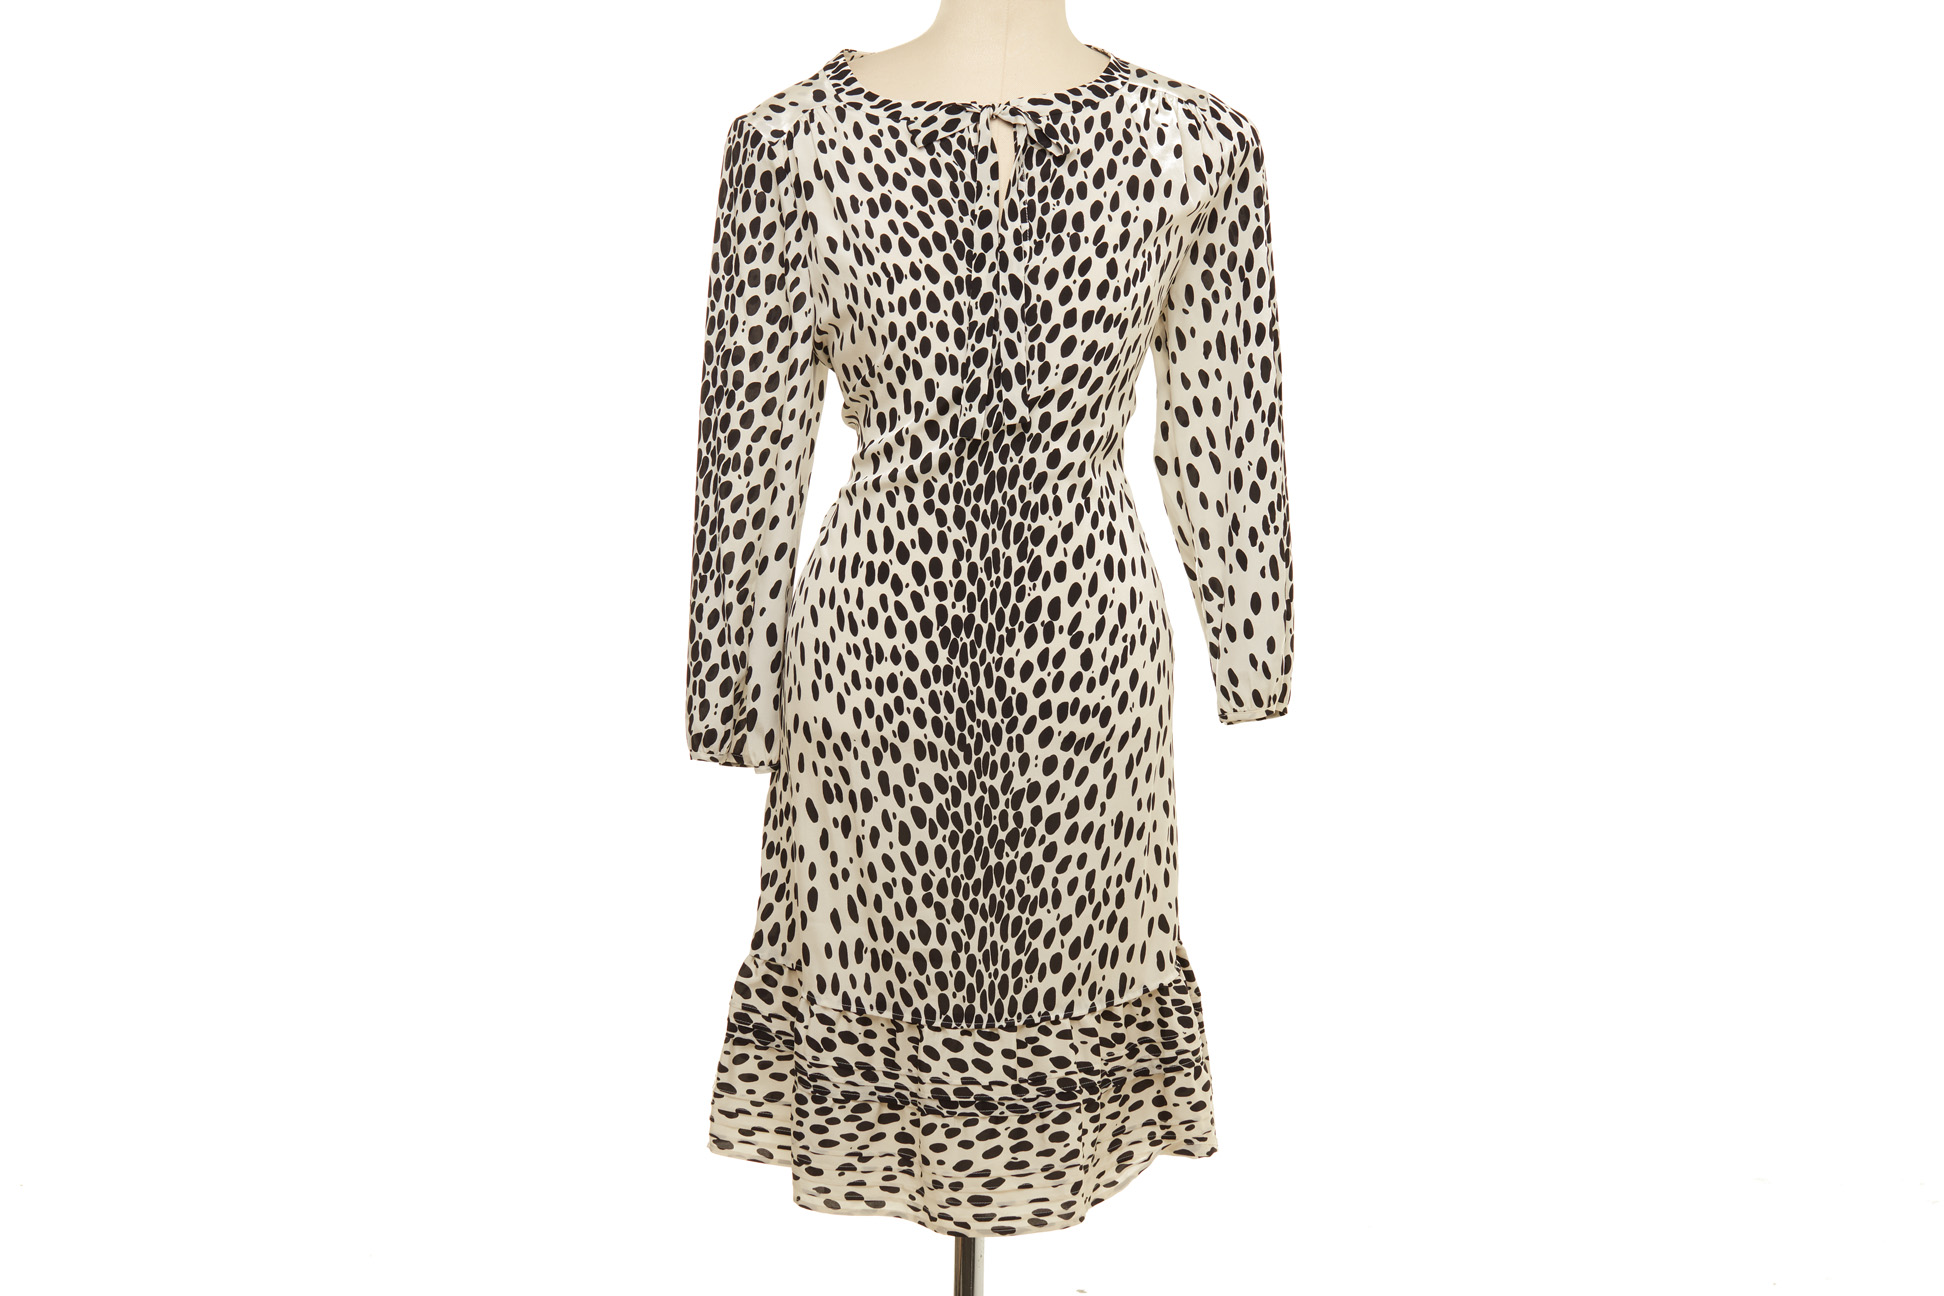 A DKNY BLACK AND WHITE SPOTTED DRESS